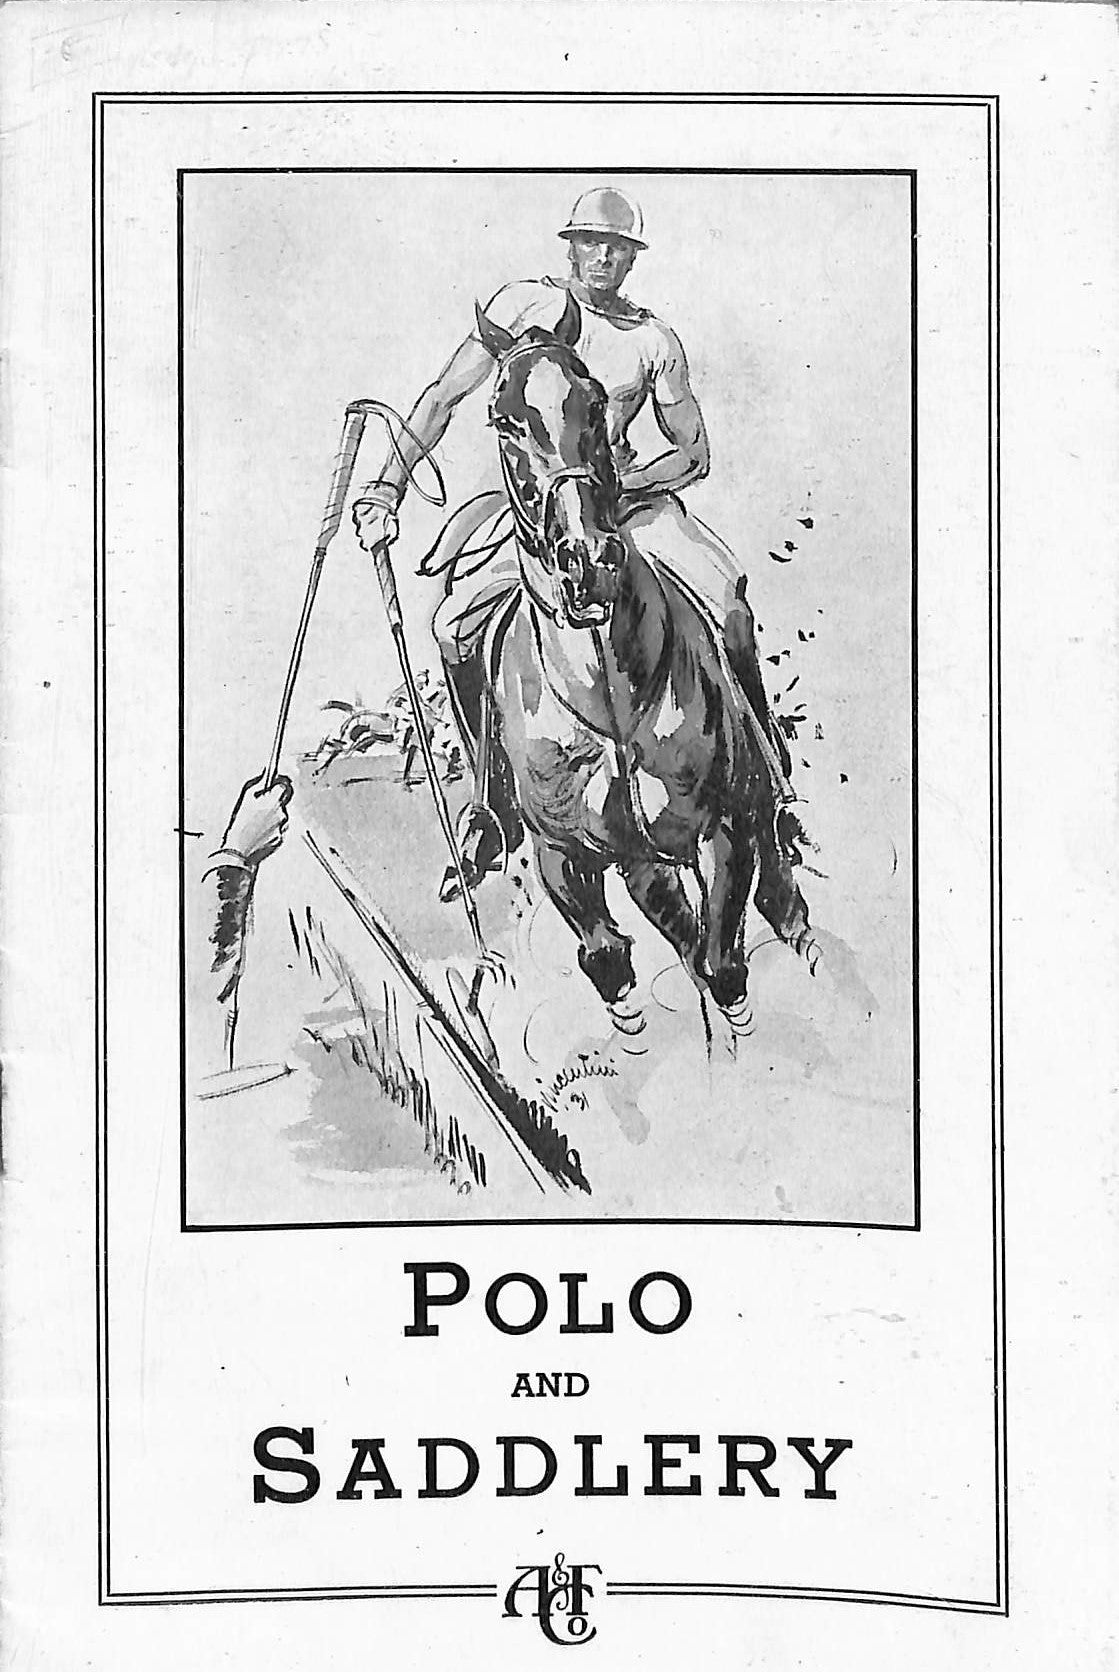 "Polo and Saddlery Abercrombie & Fitch Catalog"